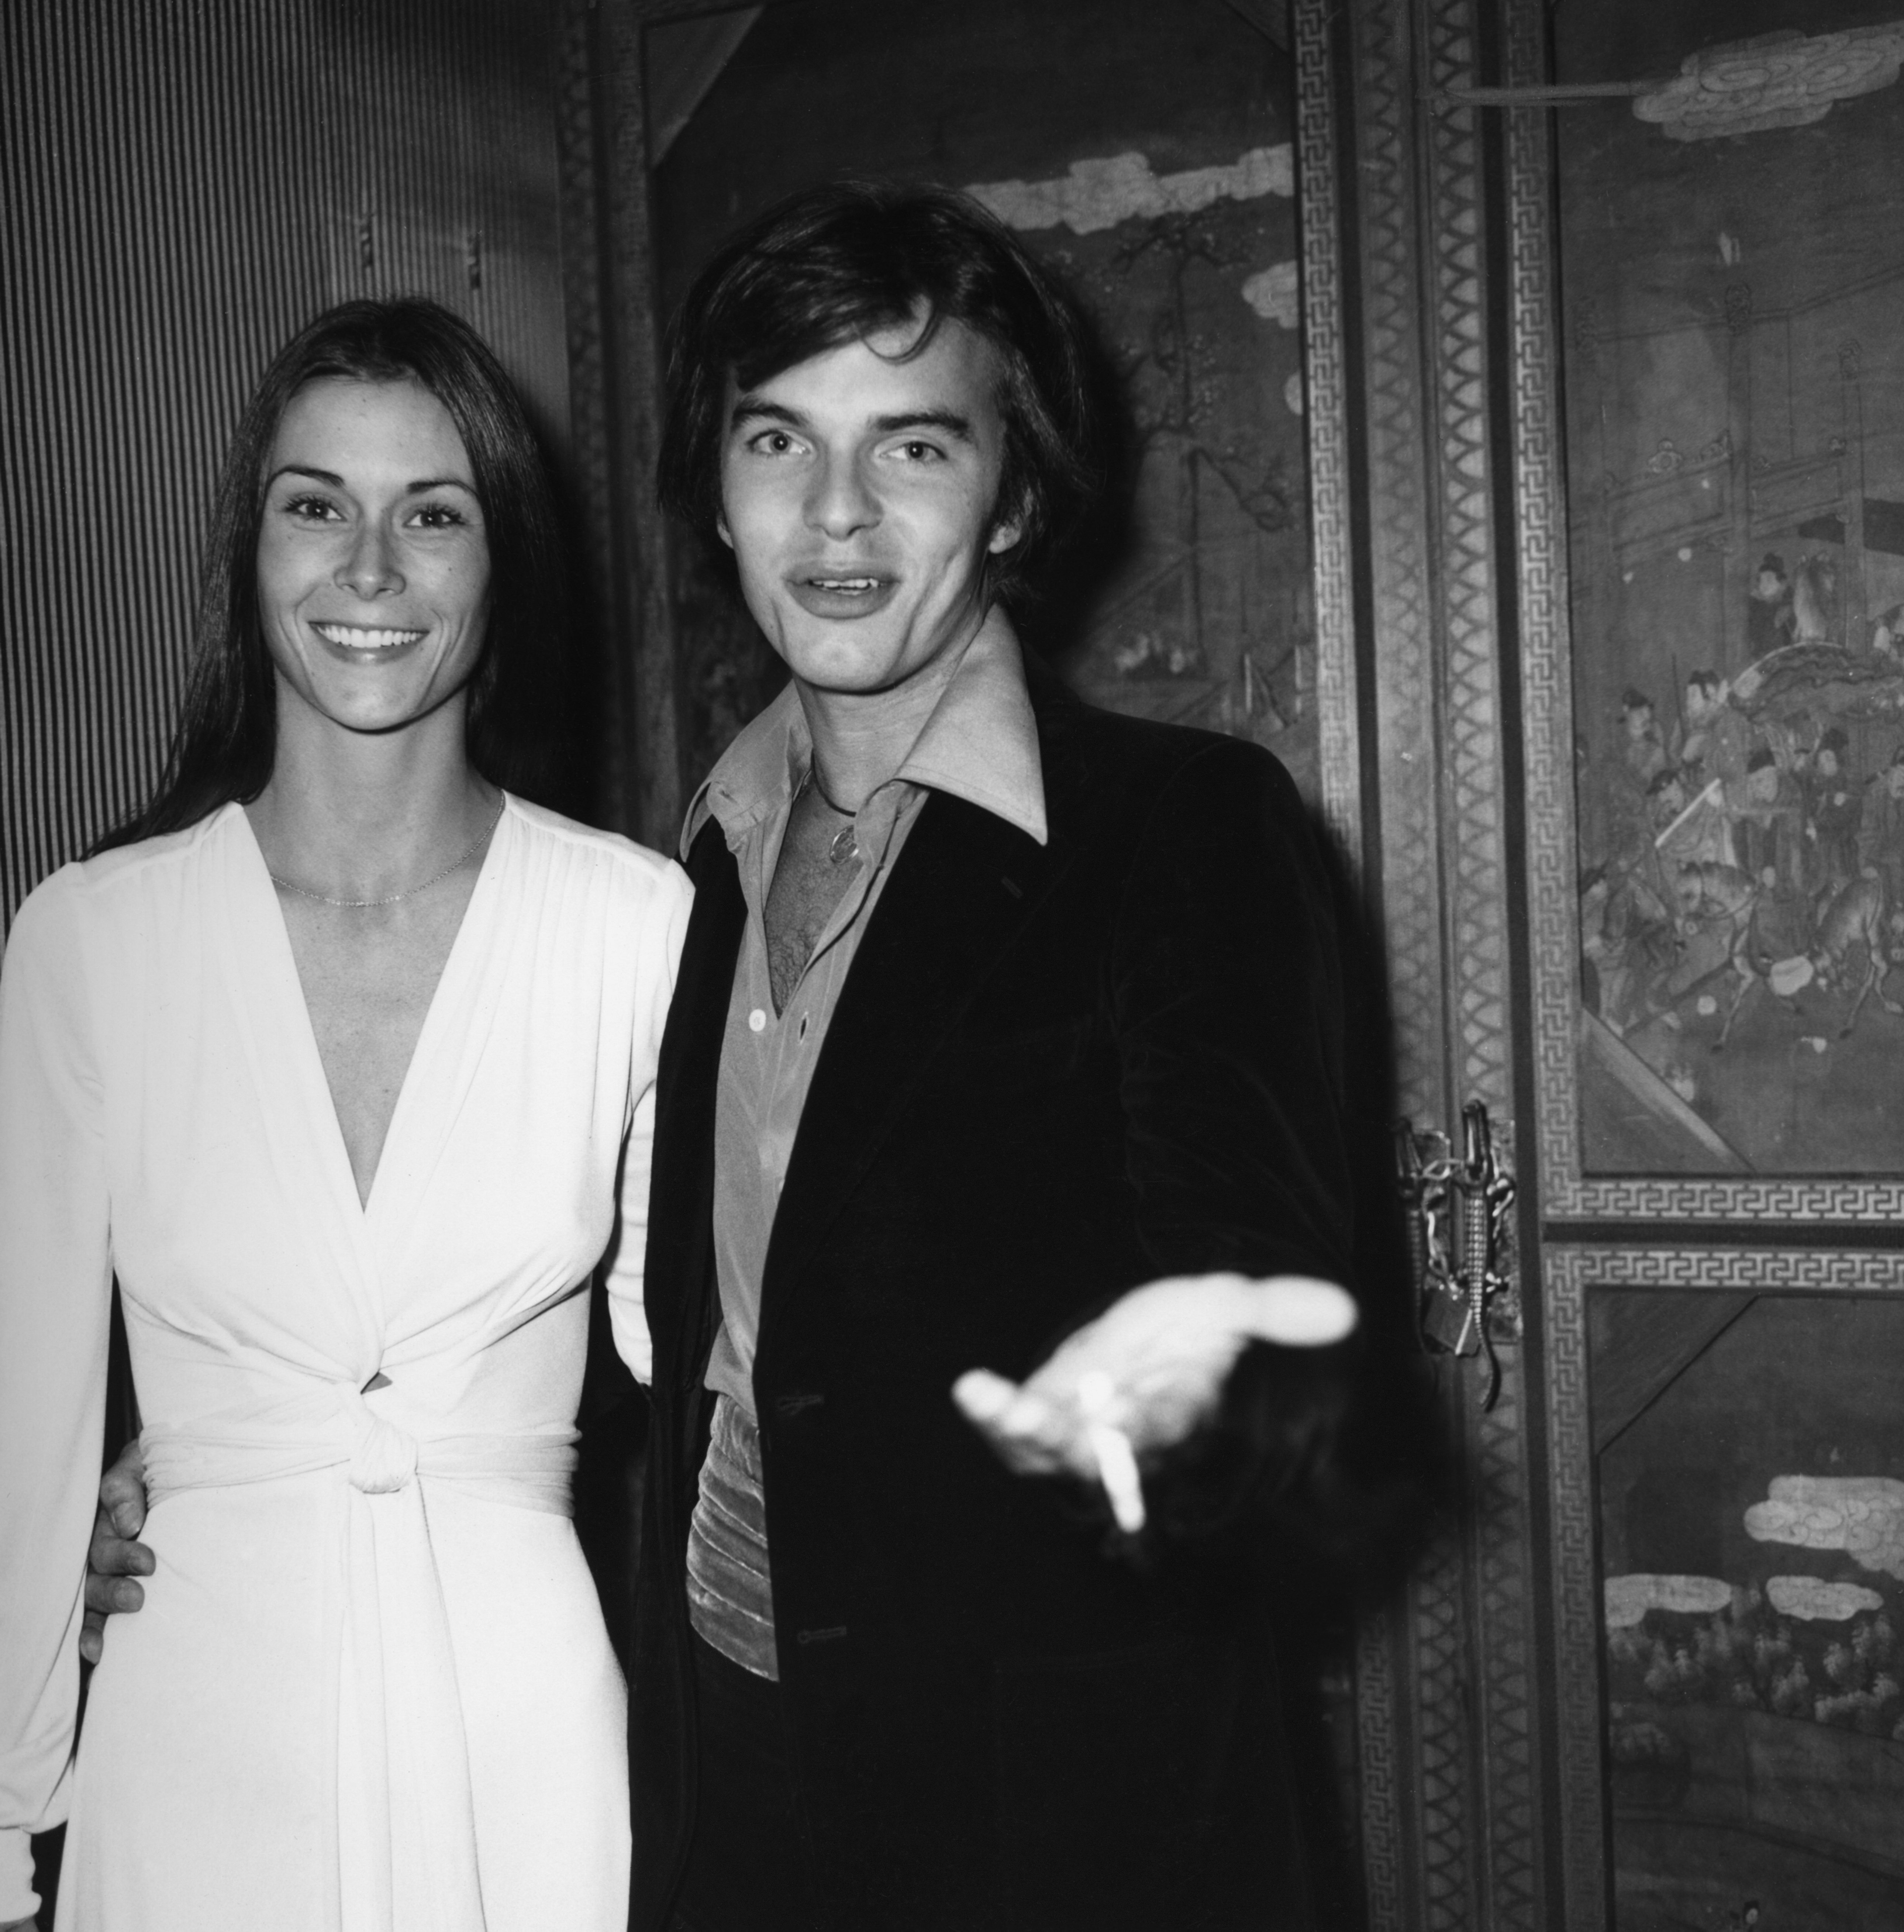 Kate Jackson attending a party for writer Mary Loos, with fellow actor Edward Albert in October 1974 | Source: Getty Images